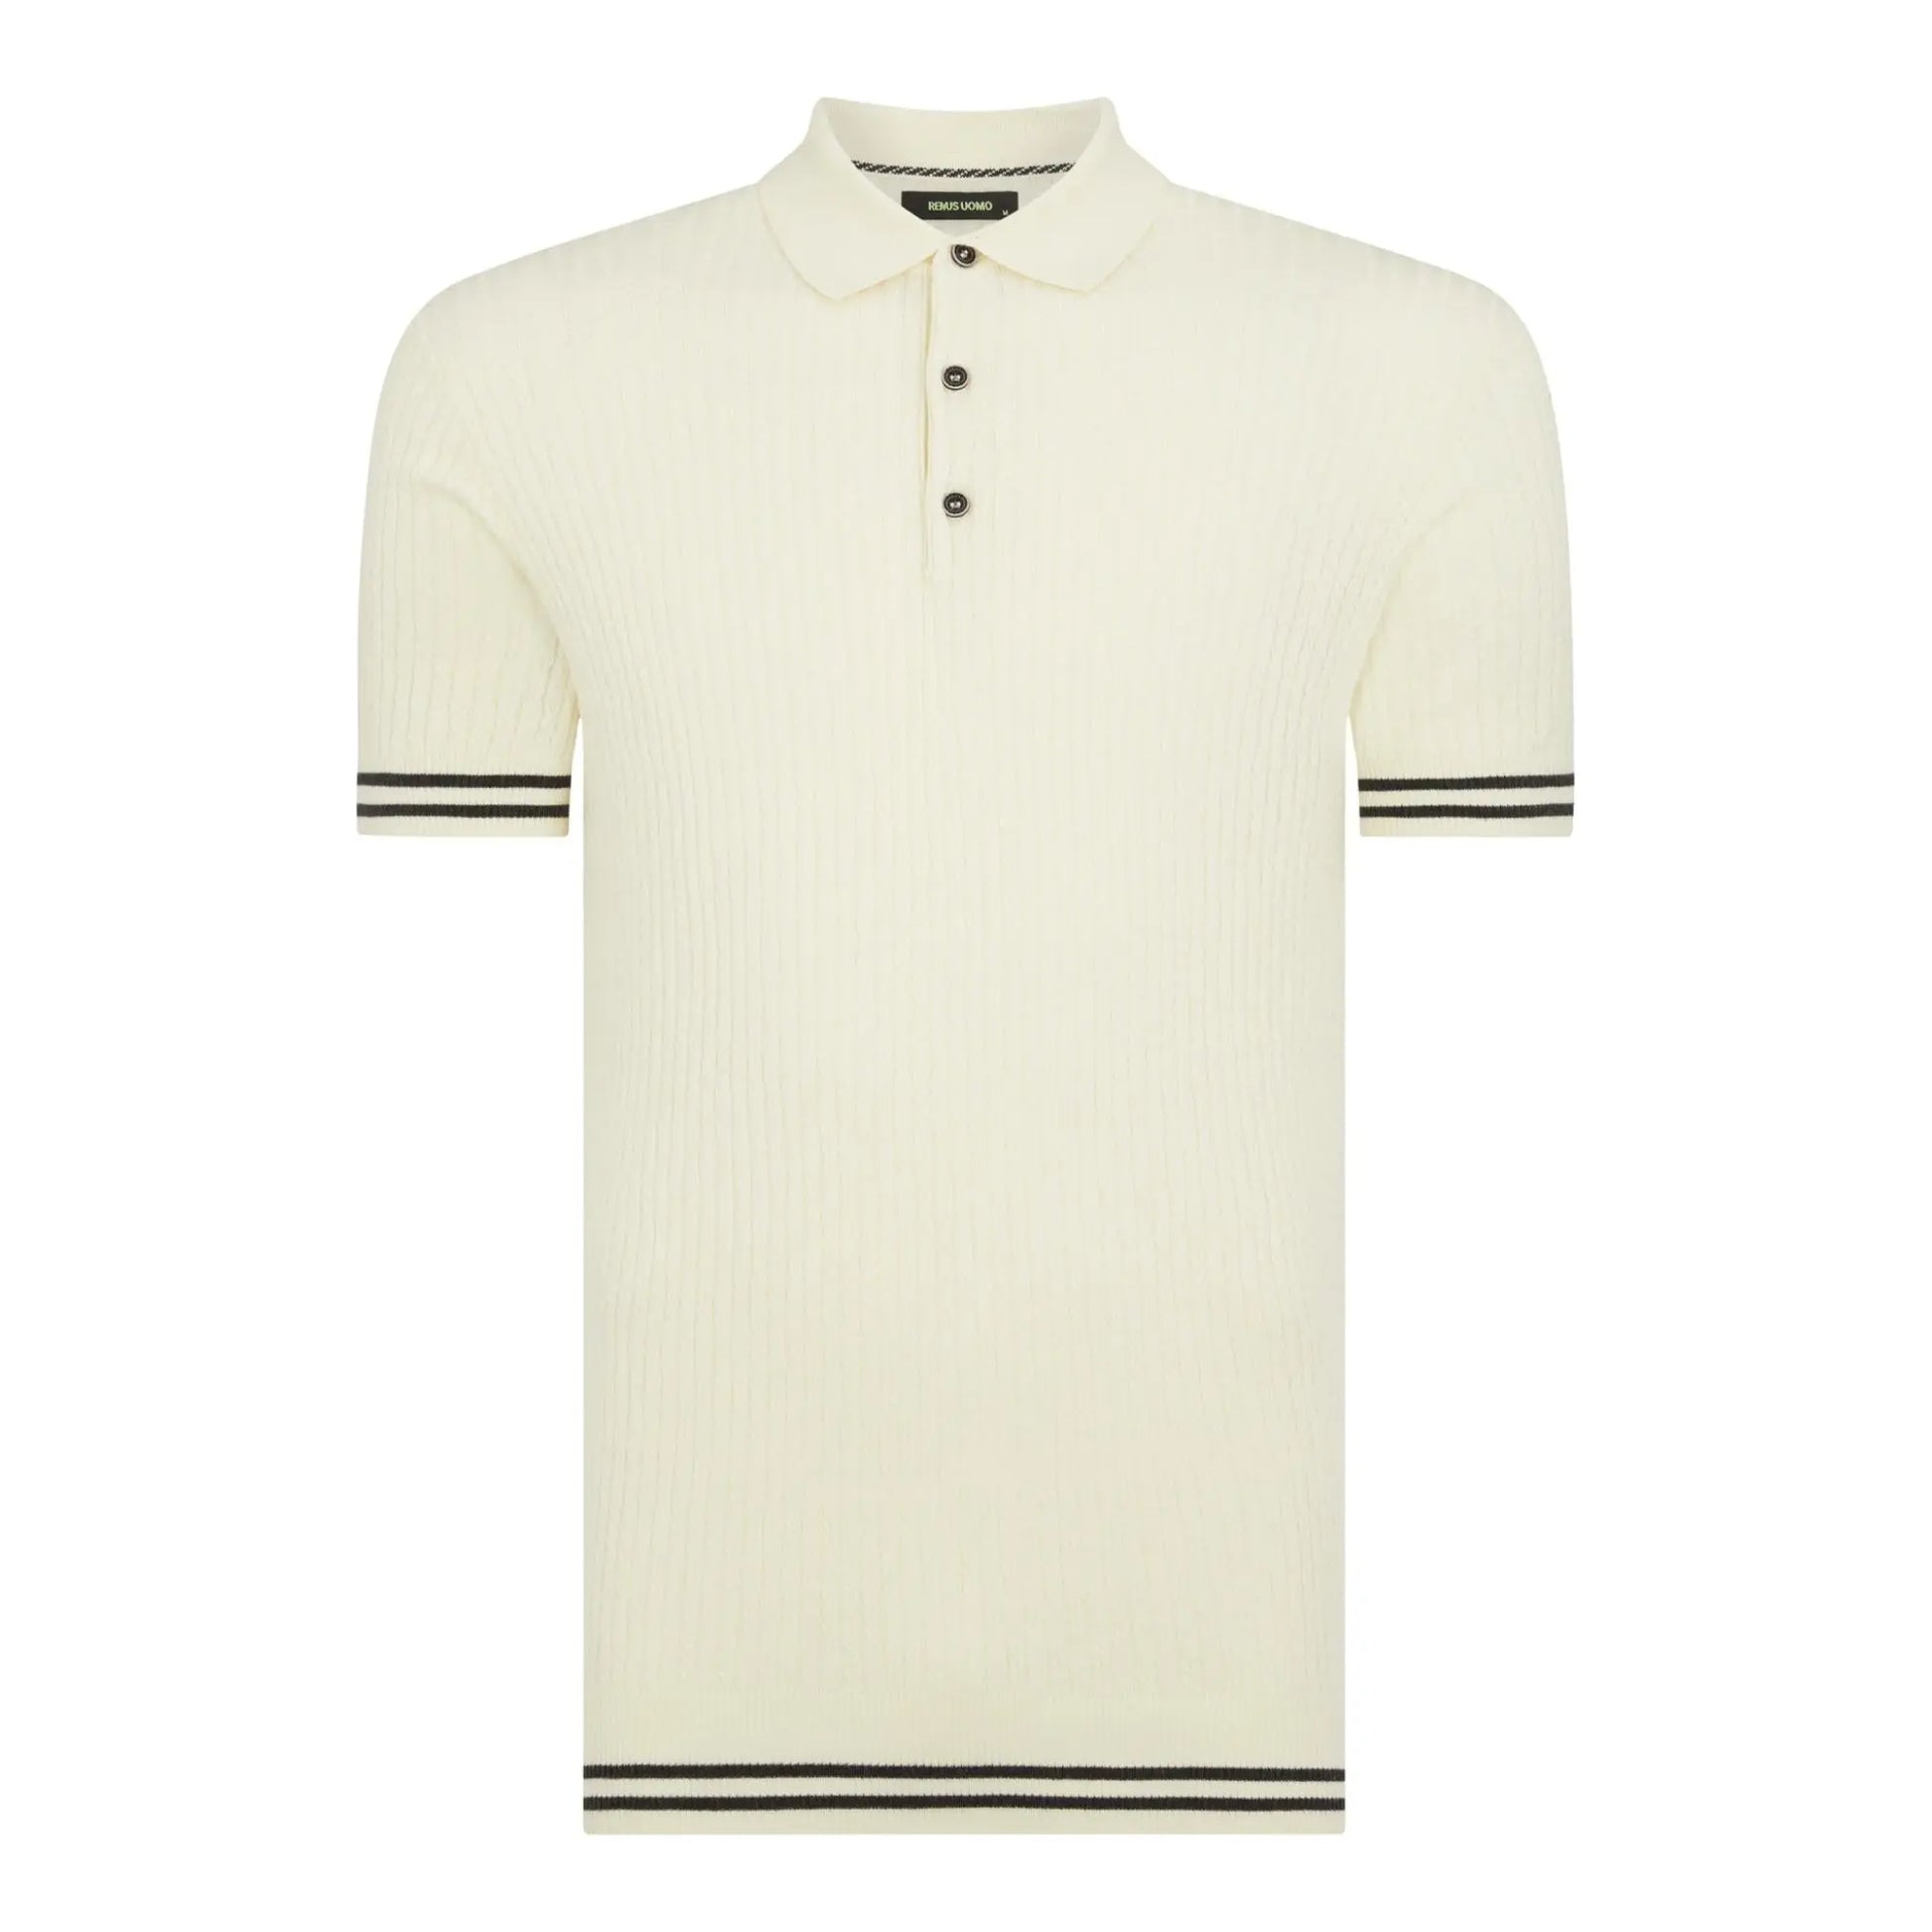 Buy Remus Uomo Textured Cable Knit Polo - Cream | Short-Sleeved Polo Shirtss at Woven Durham